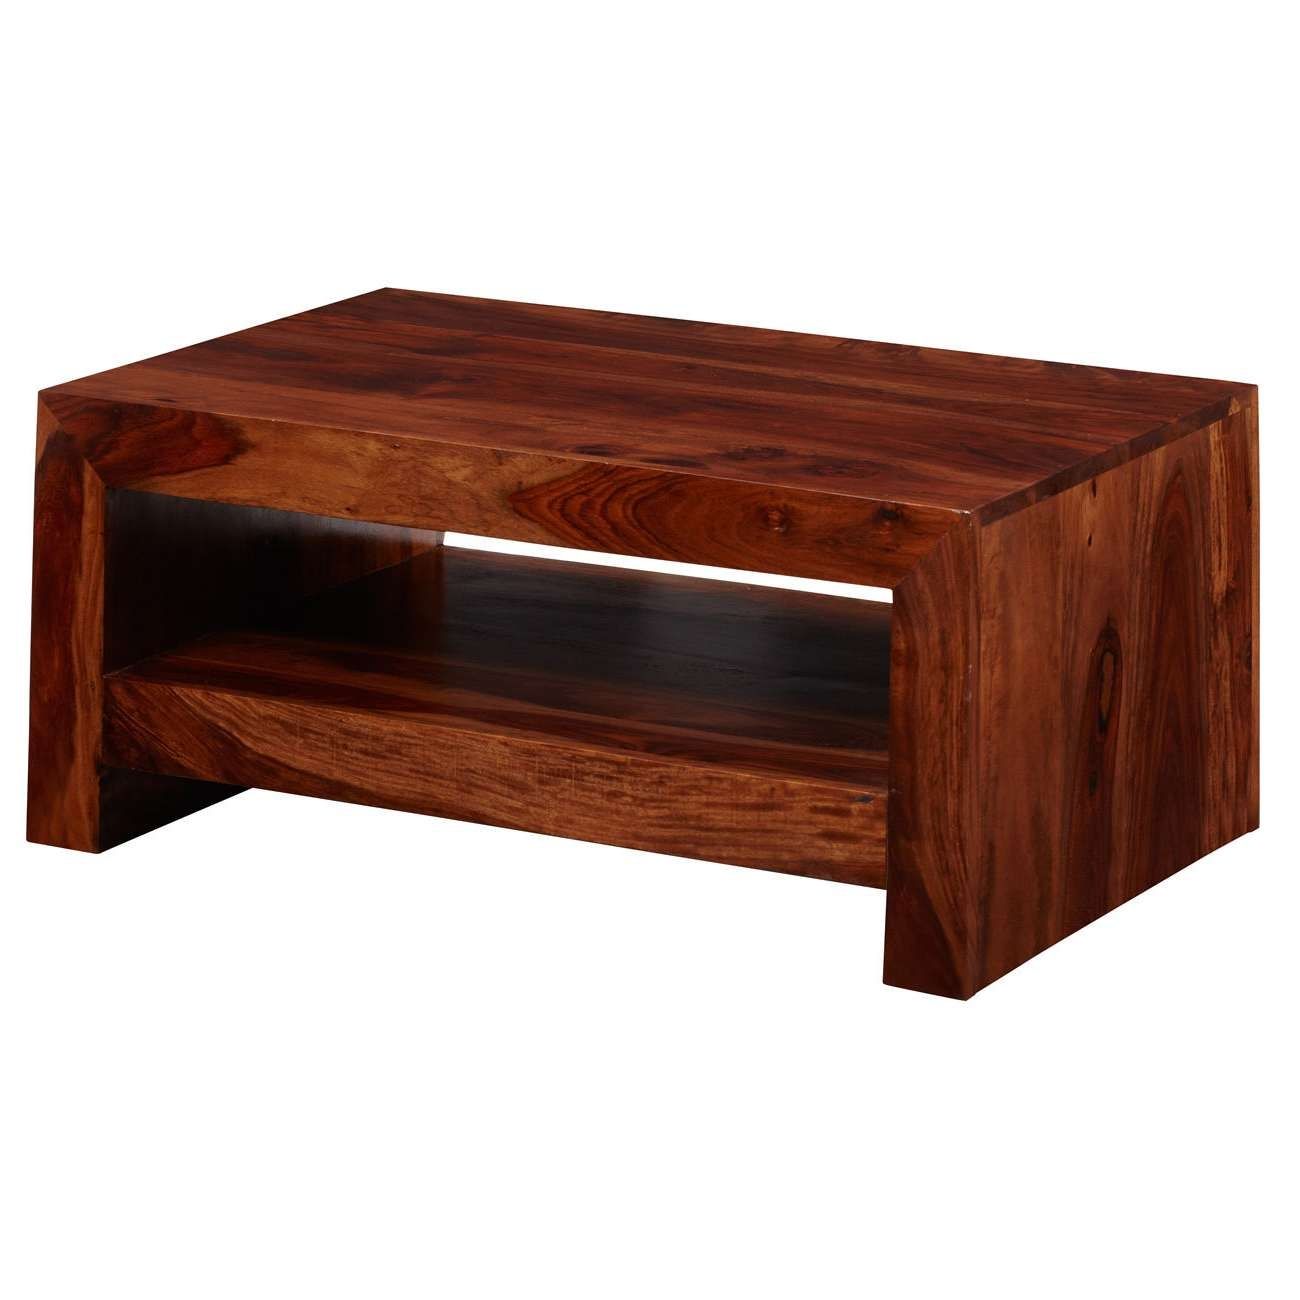 Coffee Tables Ideas: Top Hardwood Coffee Table Plans Hardwood In Best And Newest High Quality Coffee Tables (View 10 of 20)